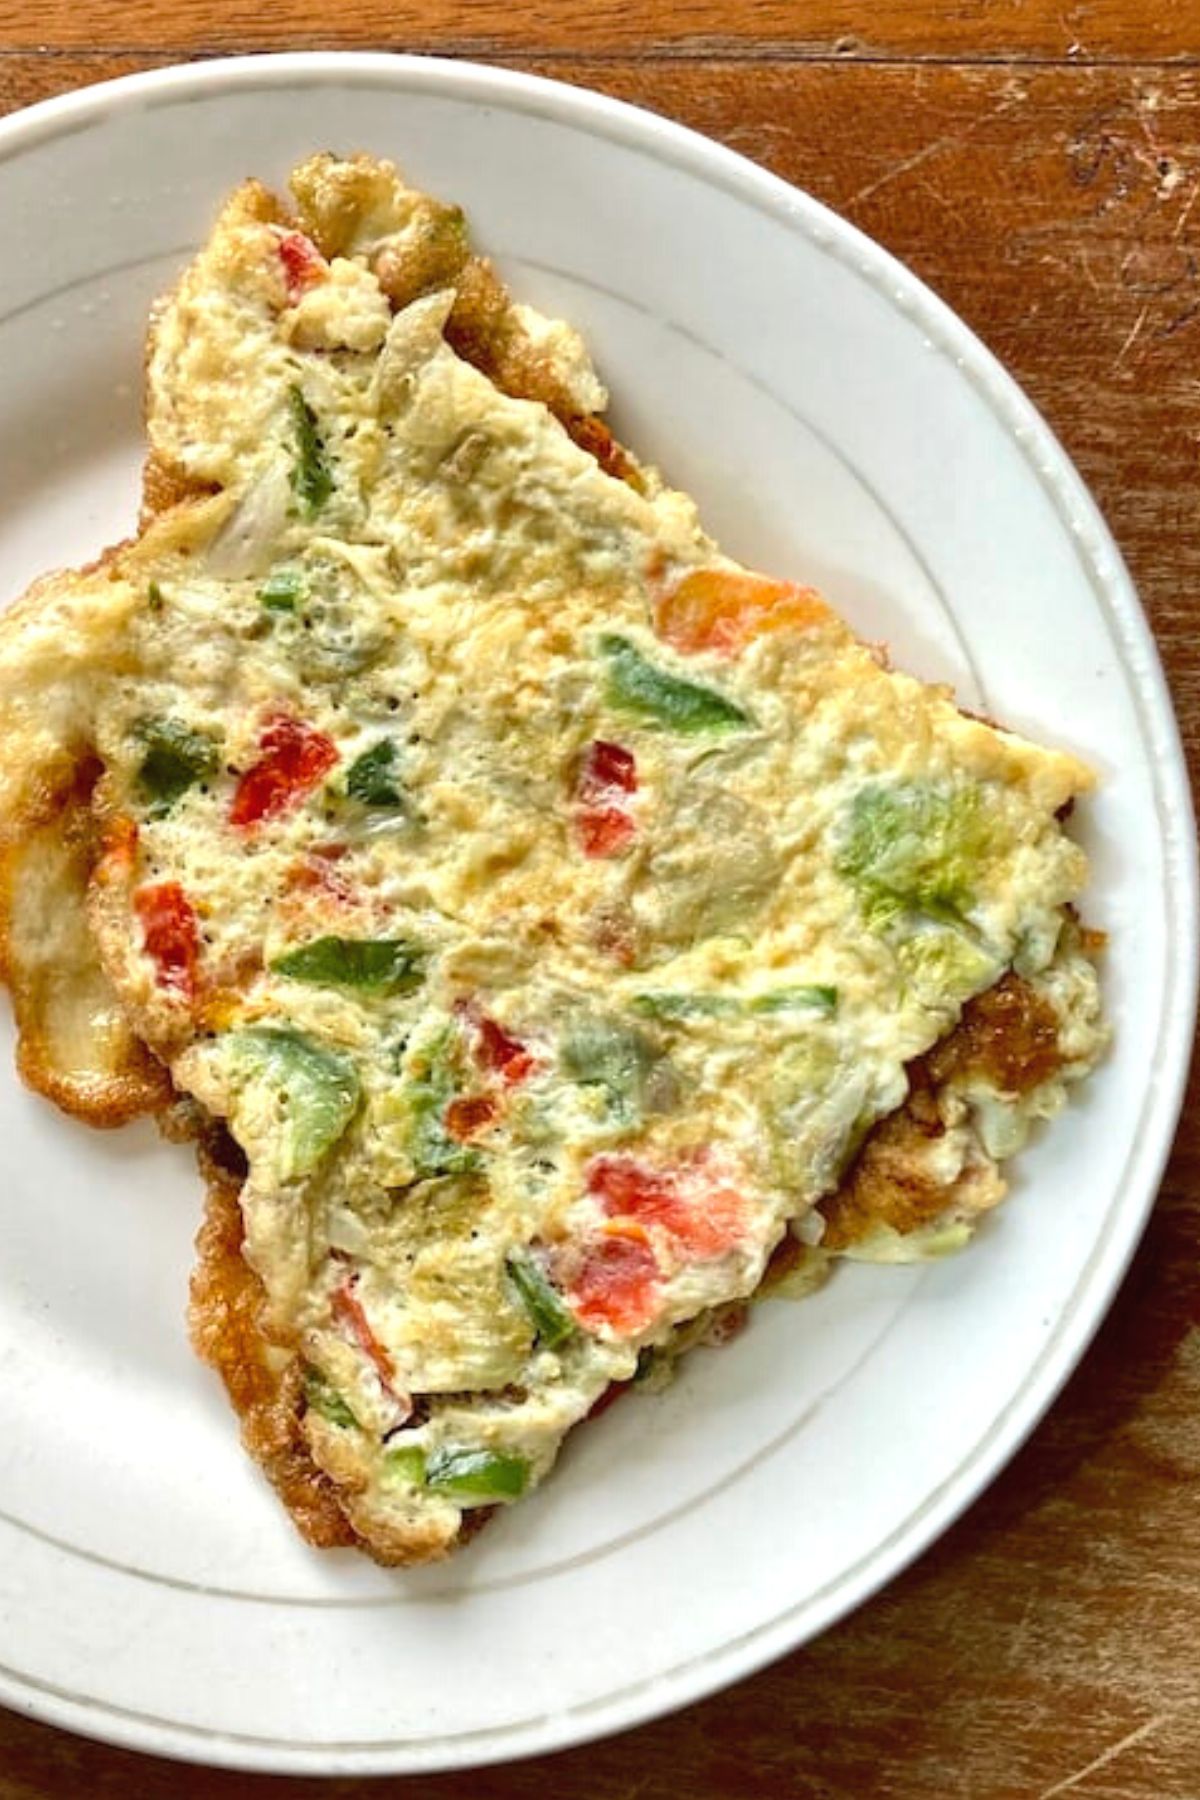 low salt omelet recipe healthy low sodium omelette recipe with tomatoes kale eggs and parsley